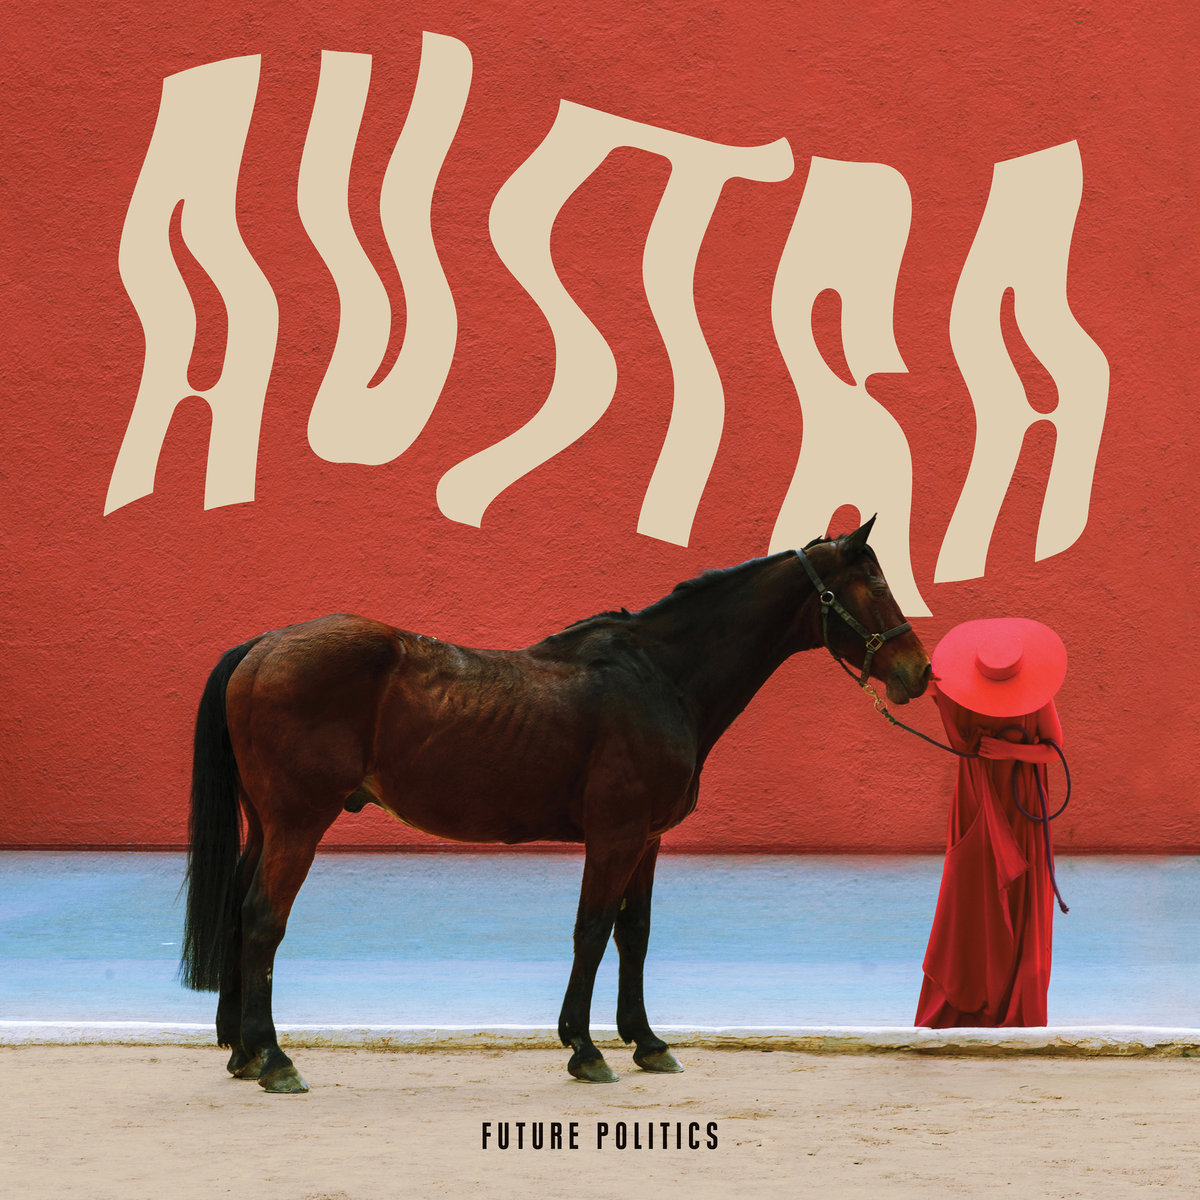 'Future Politics' by Austra, album review by Gregory Adams.